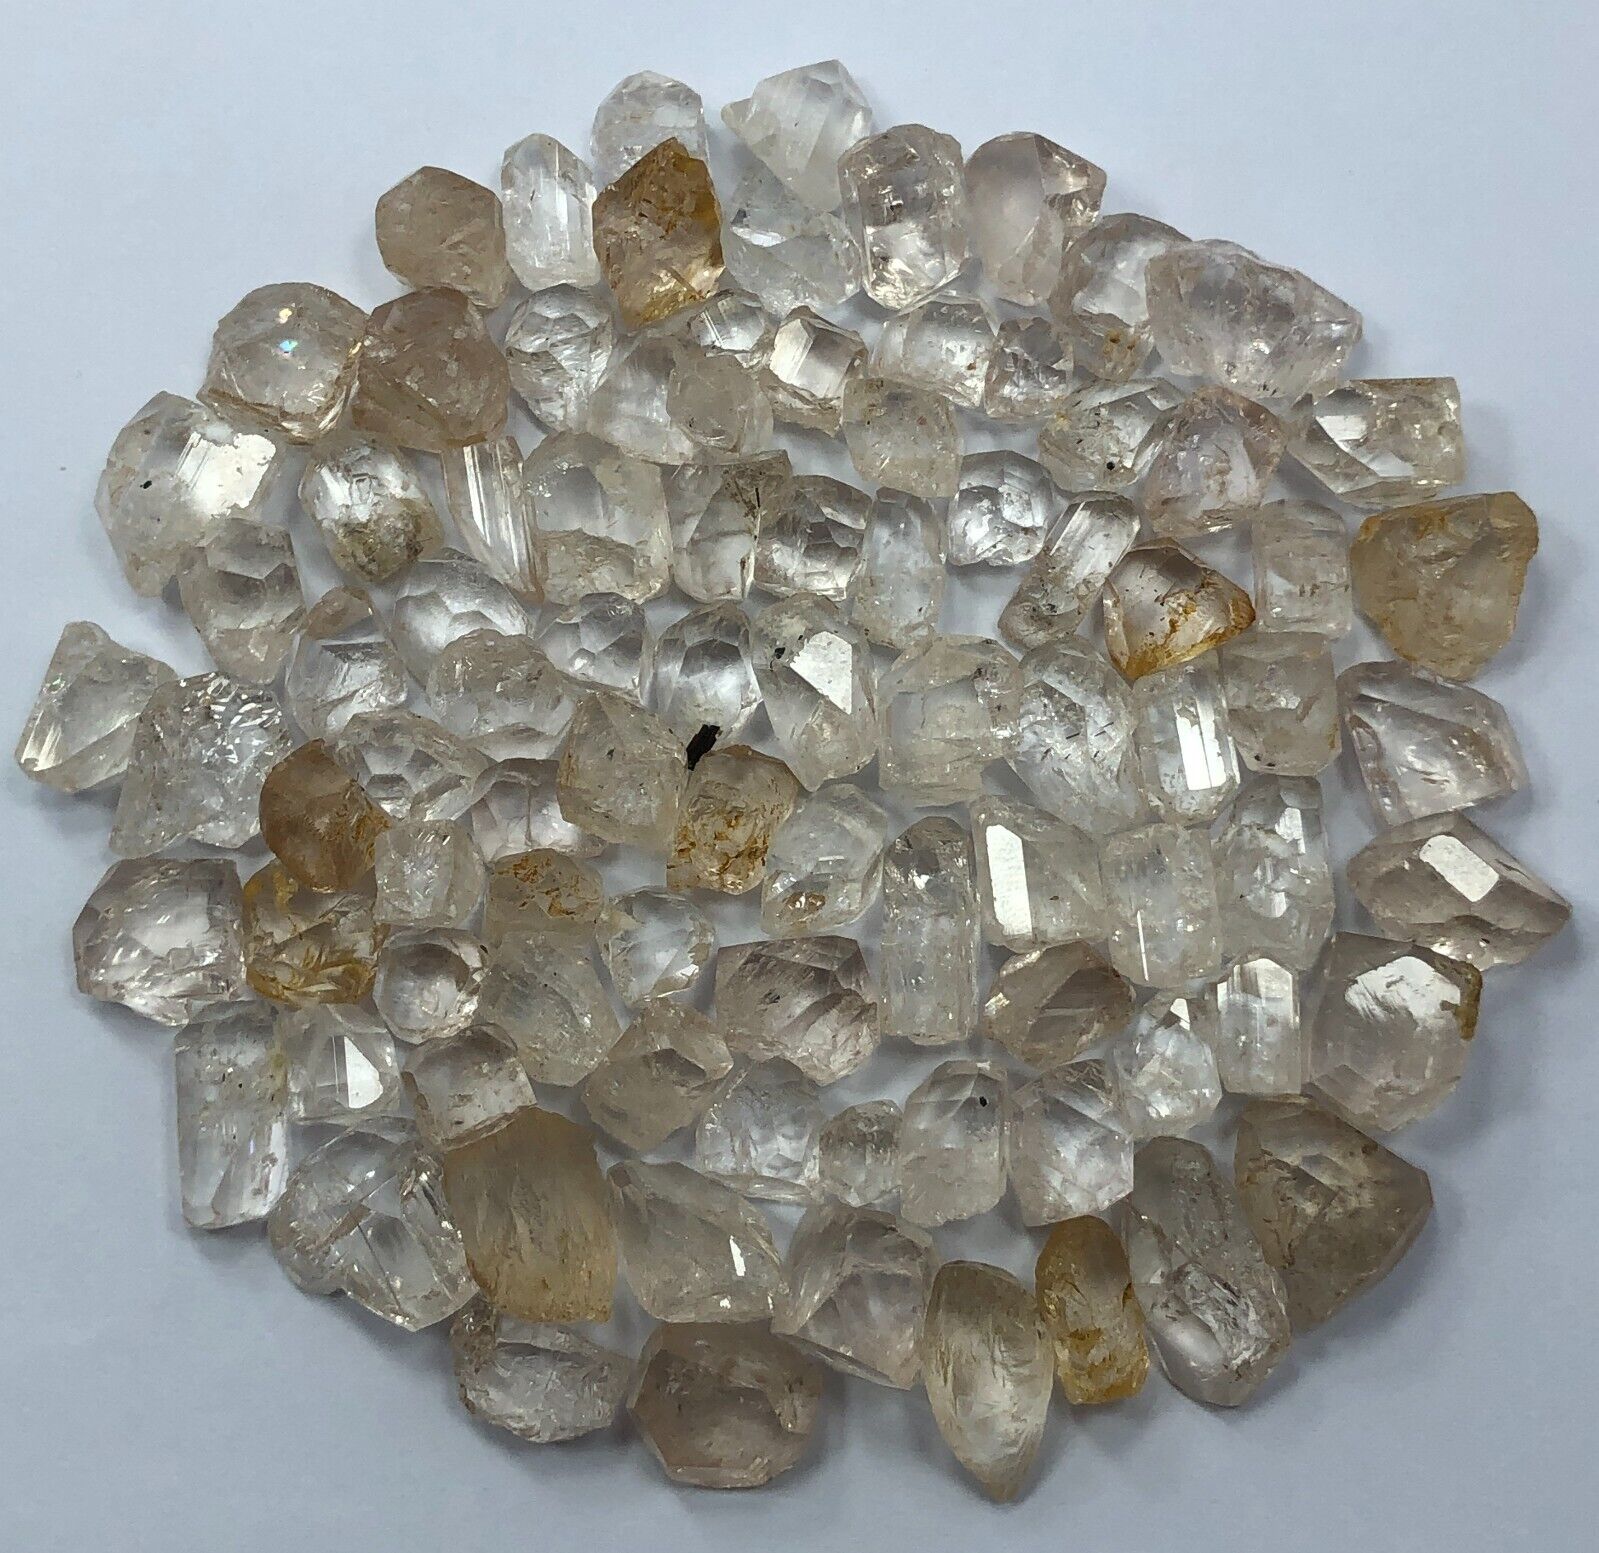 165g Good Quality Topaz Terminated Crystals lot from Skardu Pakistan